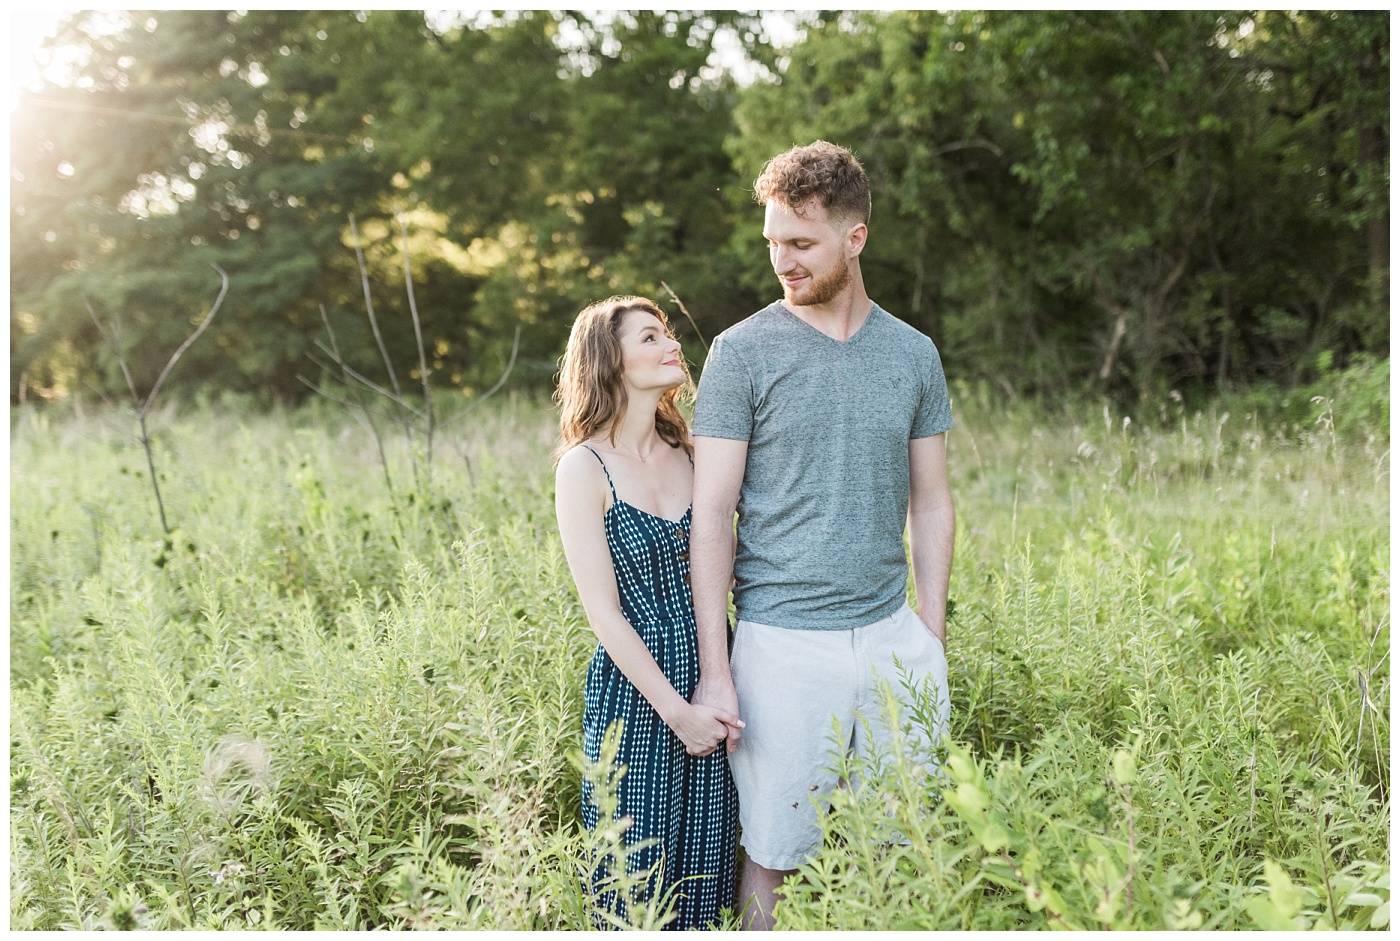 Stephanie Marie Photography Labor for Love Downtown North Liberty Engagement Session Iowa City Wedding Photographer Devin Cody_0018.jpg